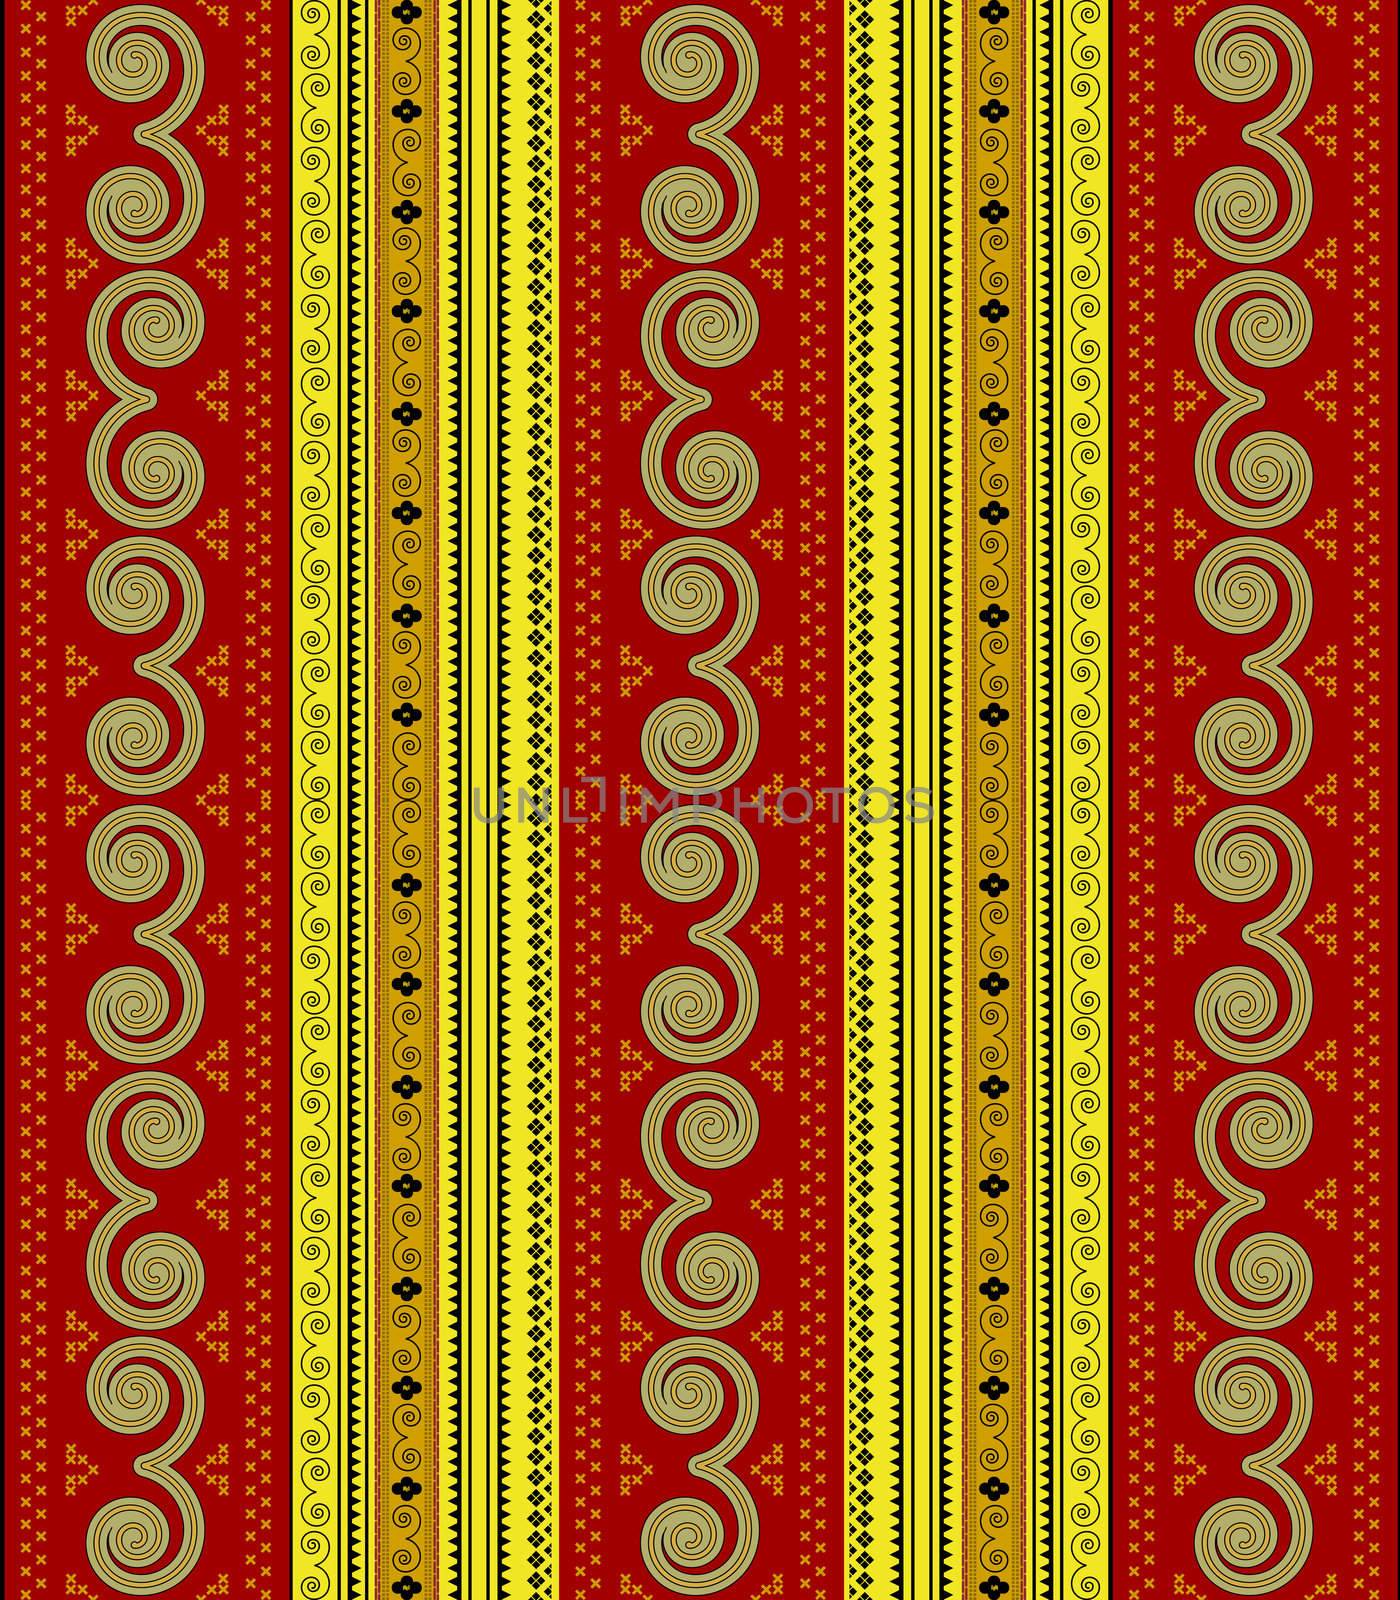 Traditional pattern by Lirch